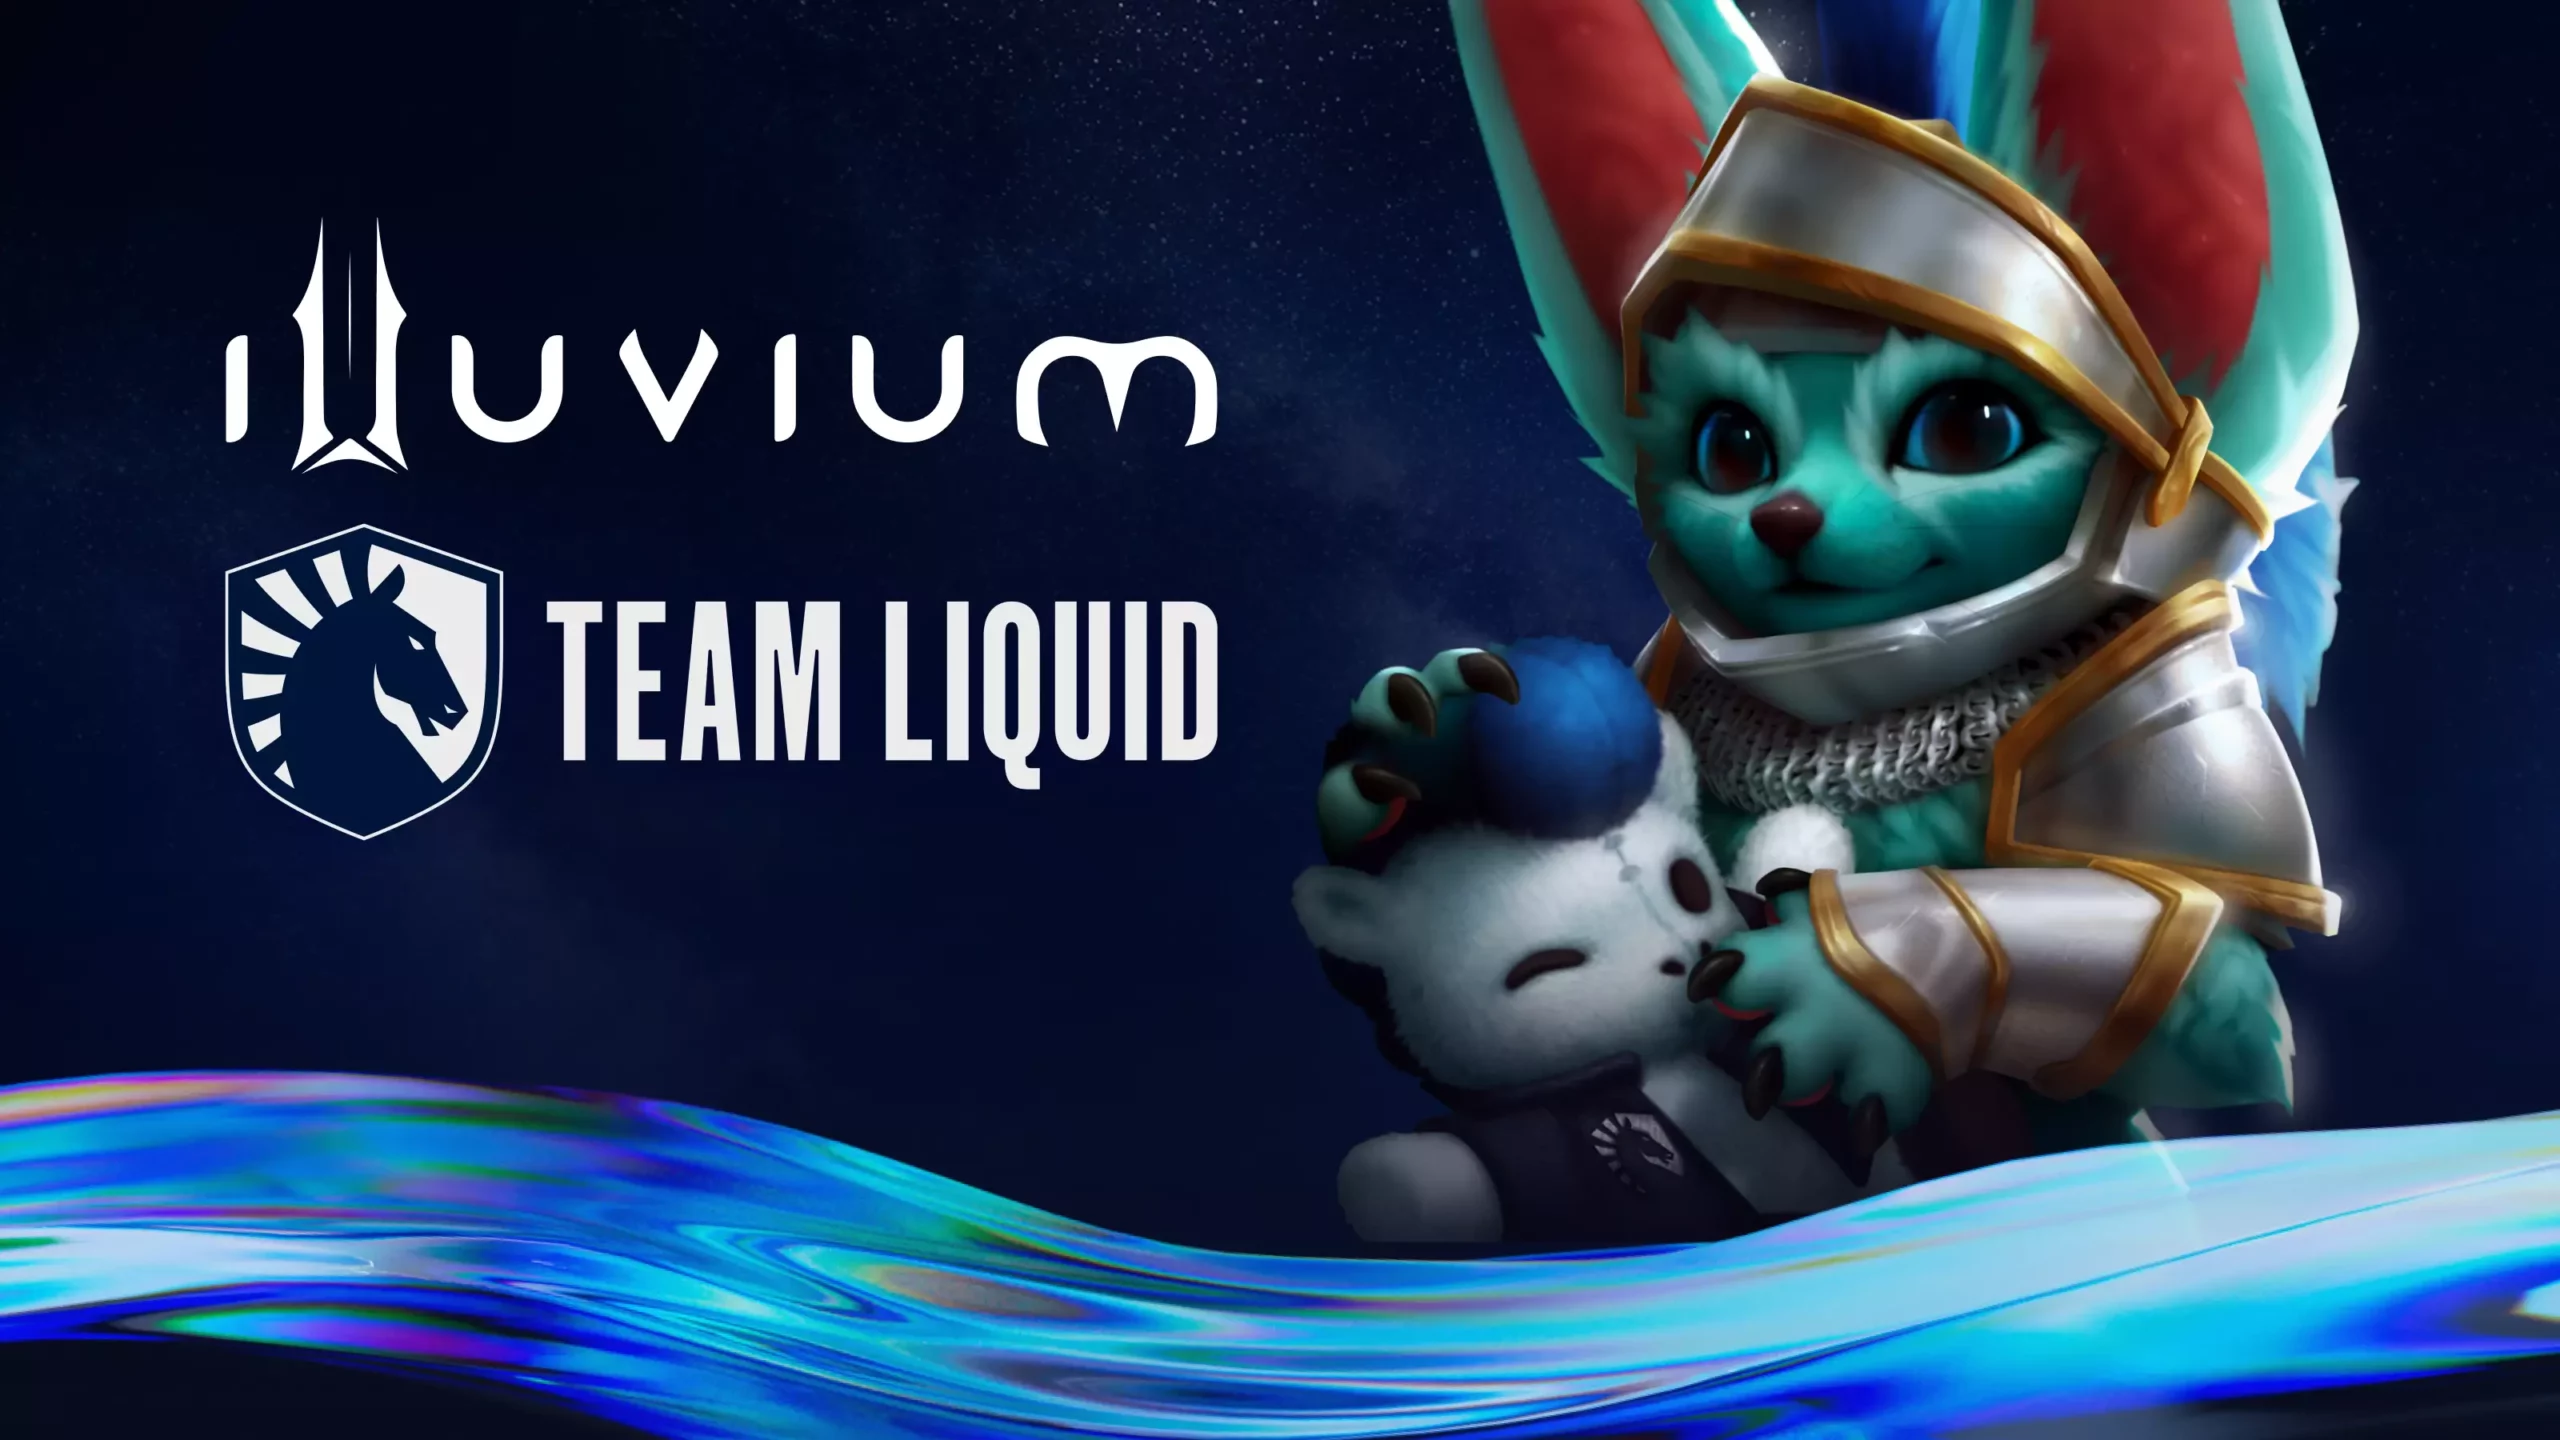 Team Liquid Partners with Illuvium to Shape the Future of Competitive Gaming